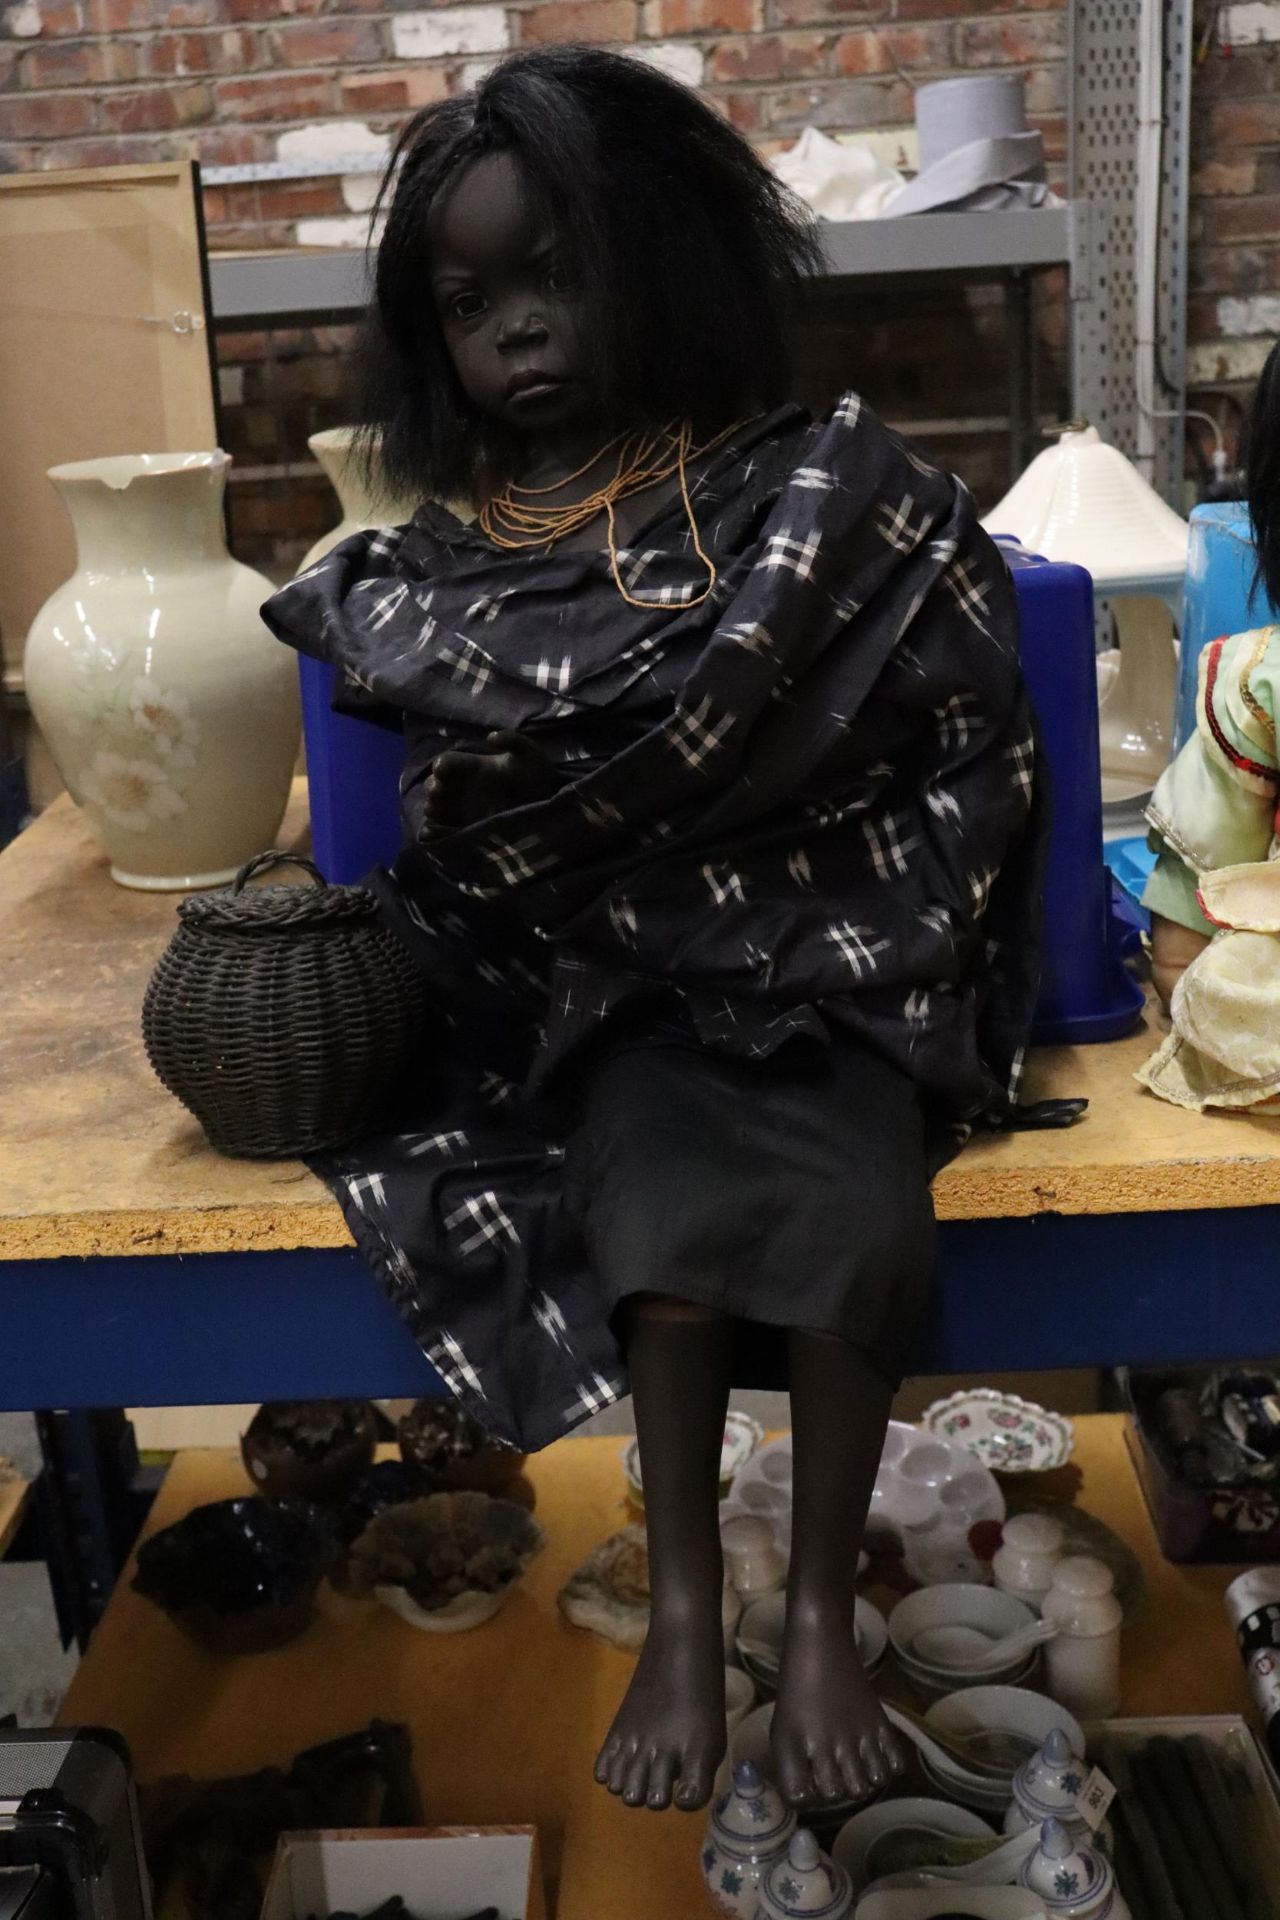 A GOTZ DOLL BY ARTIST PHILLIP HEATH IN TRADITIONAL DRESS LIMITED EDITION 466/550 1995